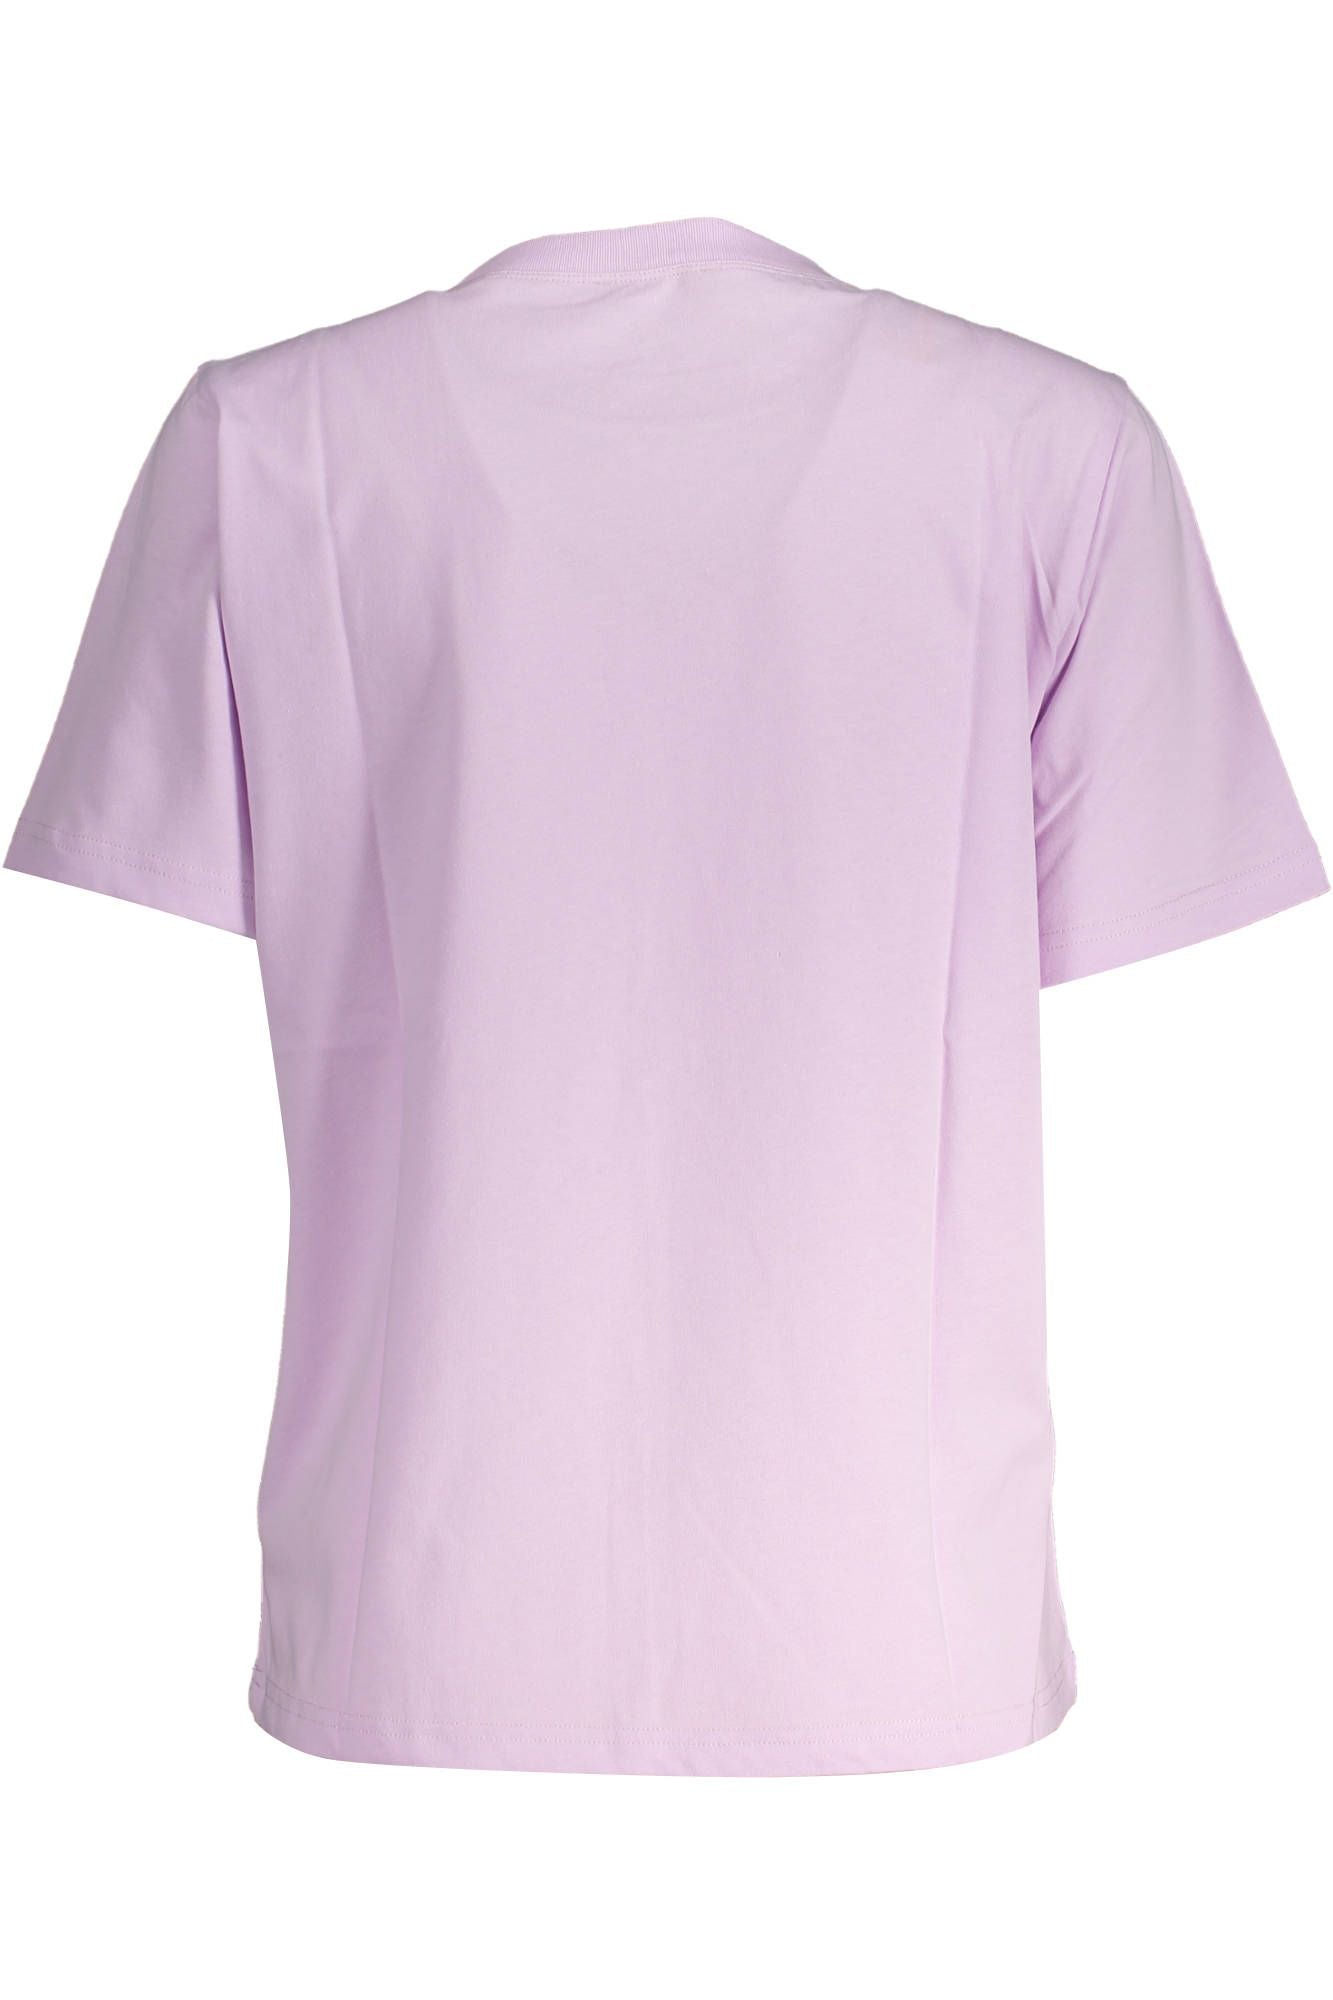 North Sails Chic Pink Organic Cotton Tee with Logo Print